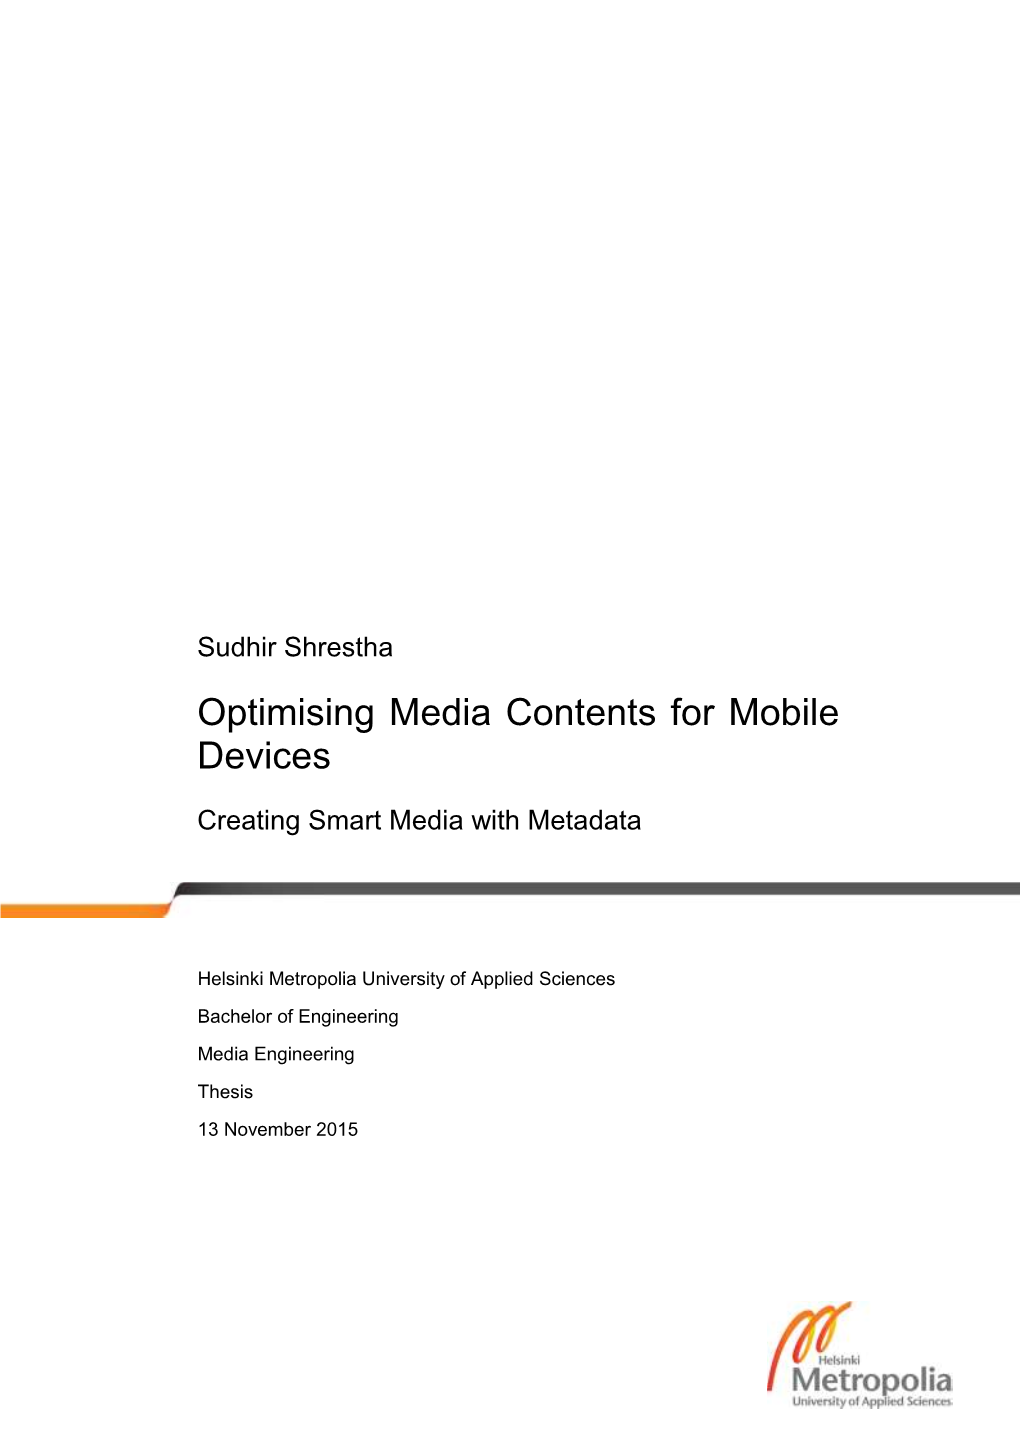 Optimising Media Contents for Mobile Devices